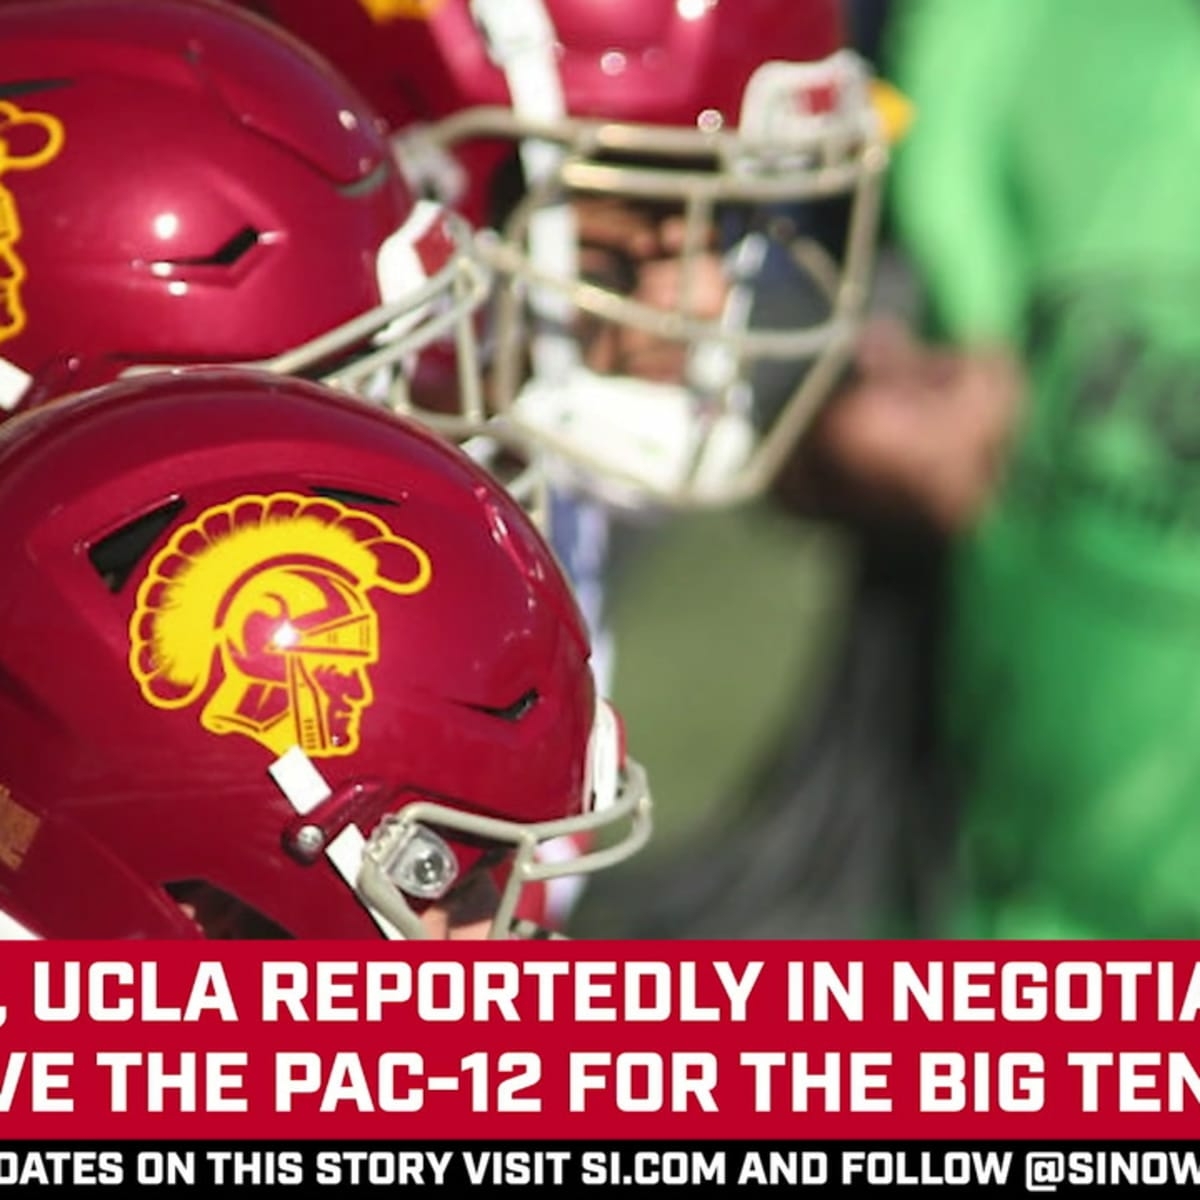 USC President "Shut Down" potential 2021 Pac-12 expansion, according to report